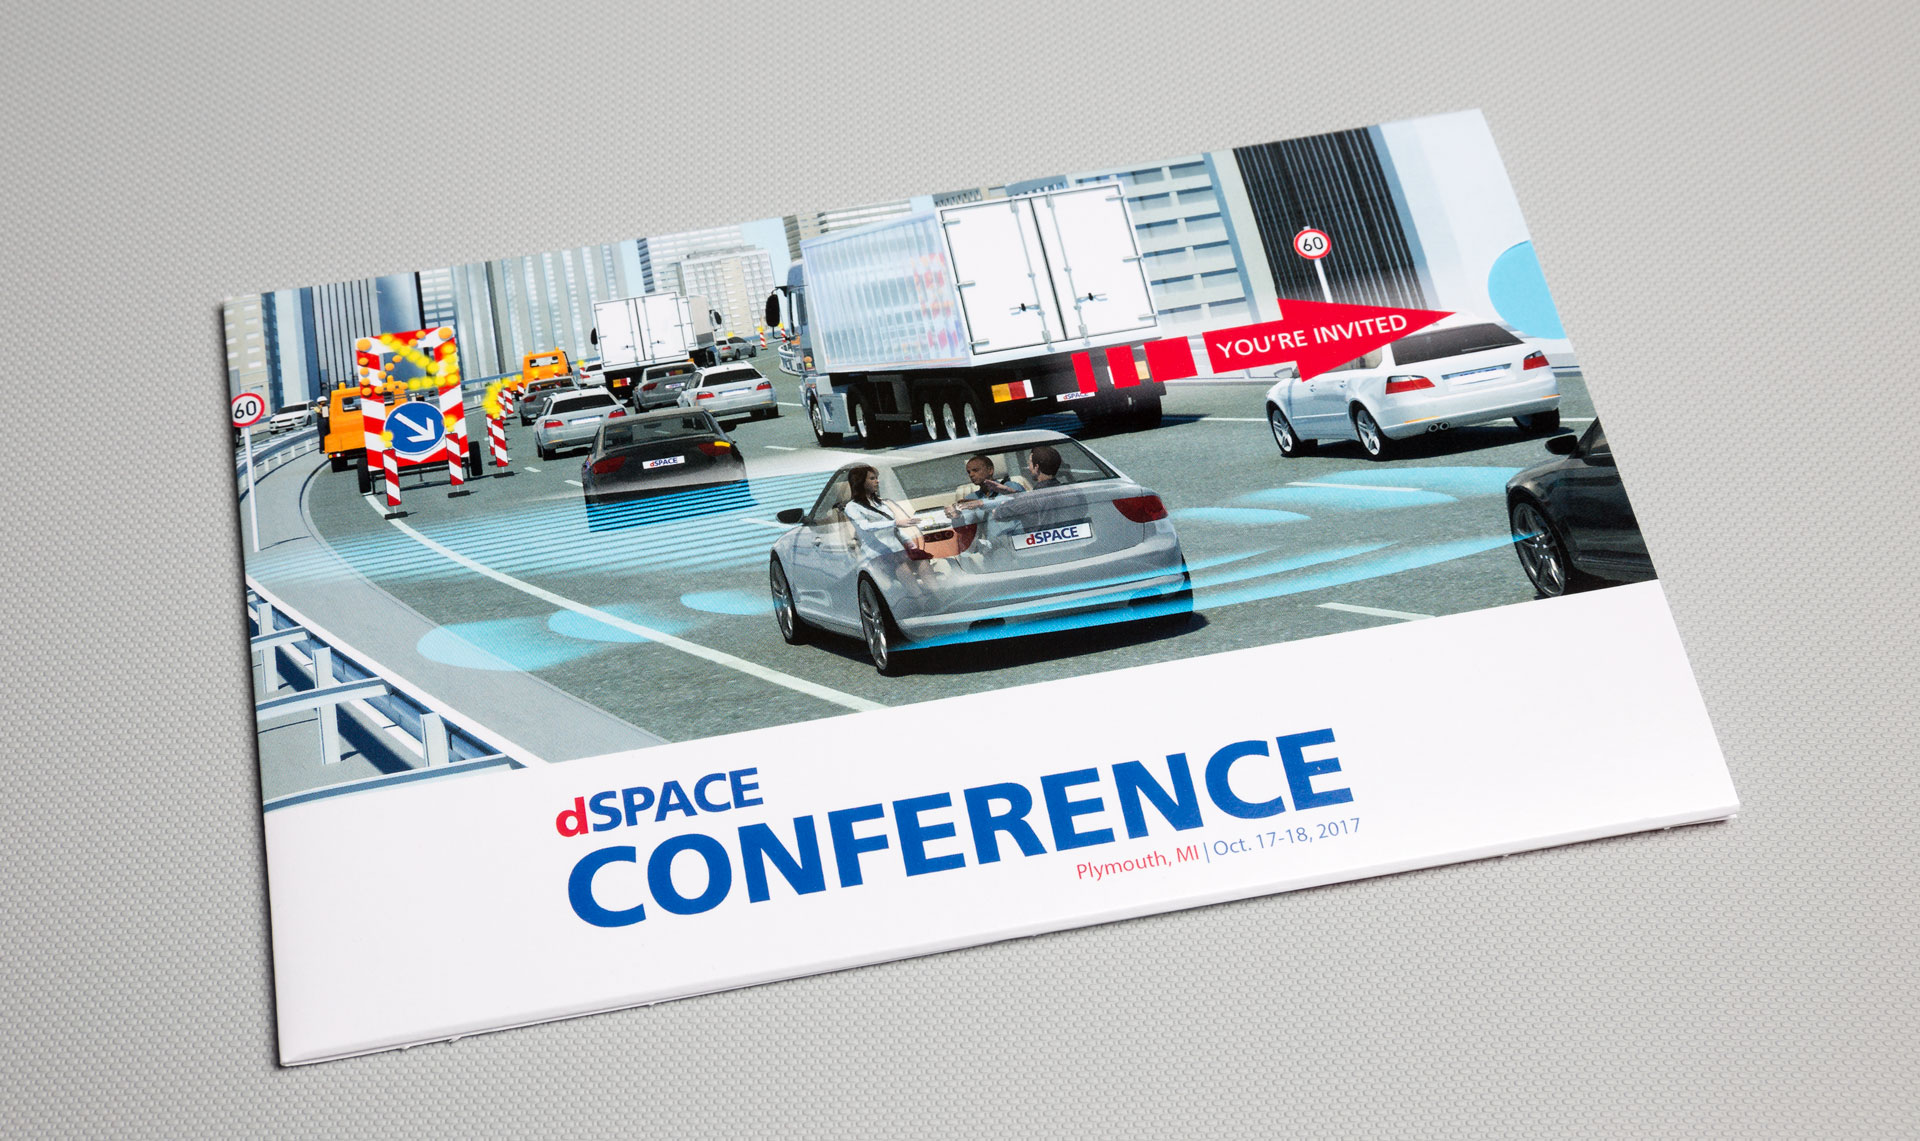 dSPACE Increases Event Attendance with the 2-Pull Telescoping Slider